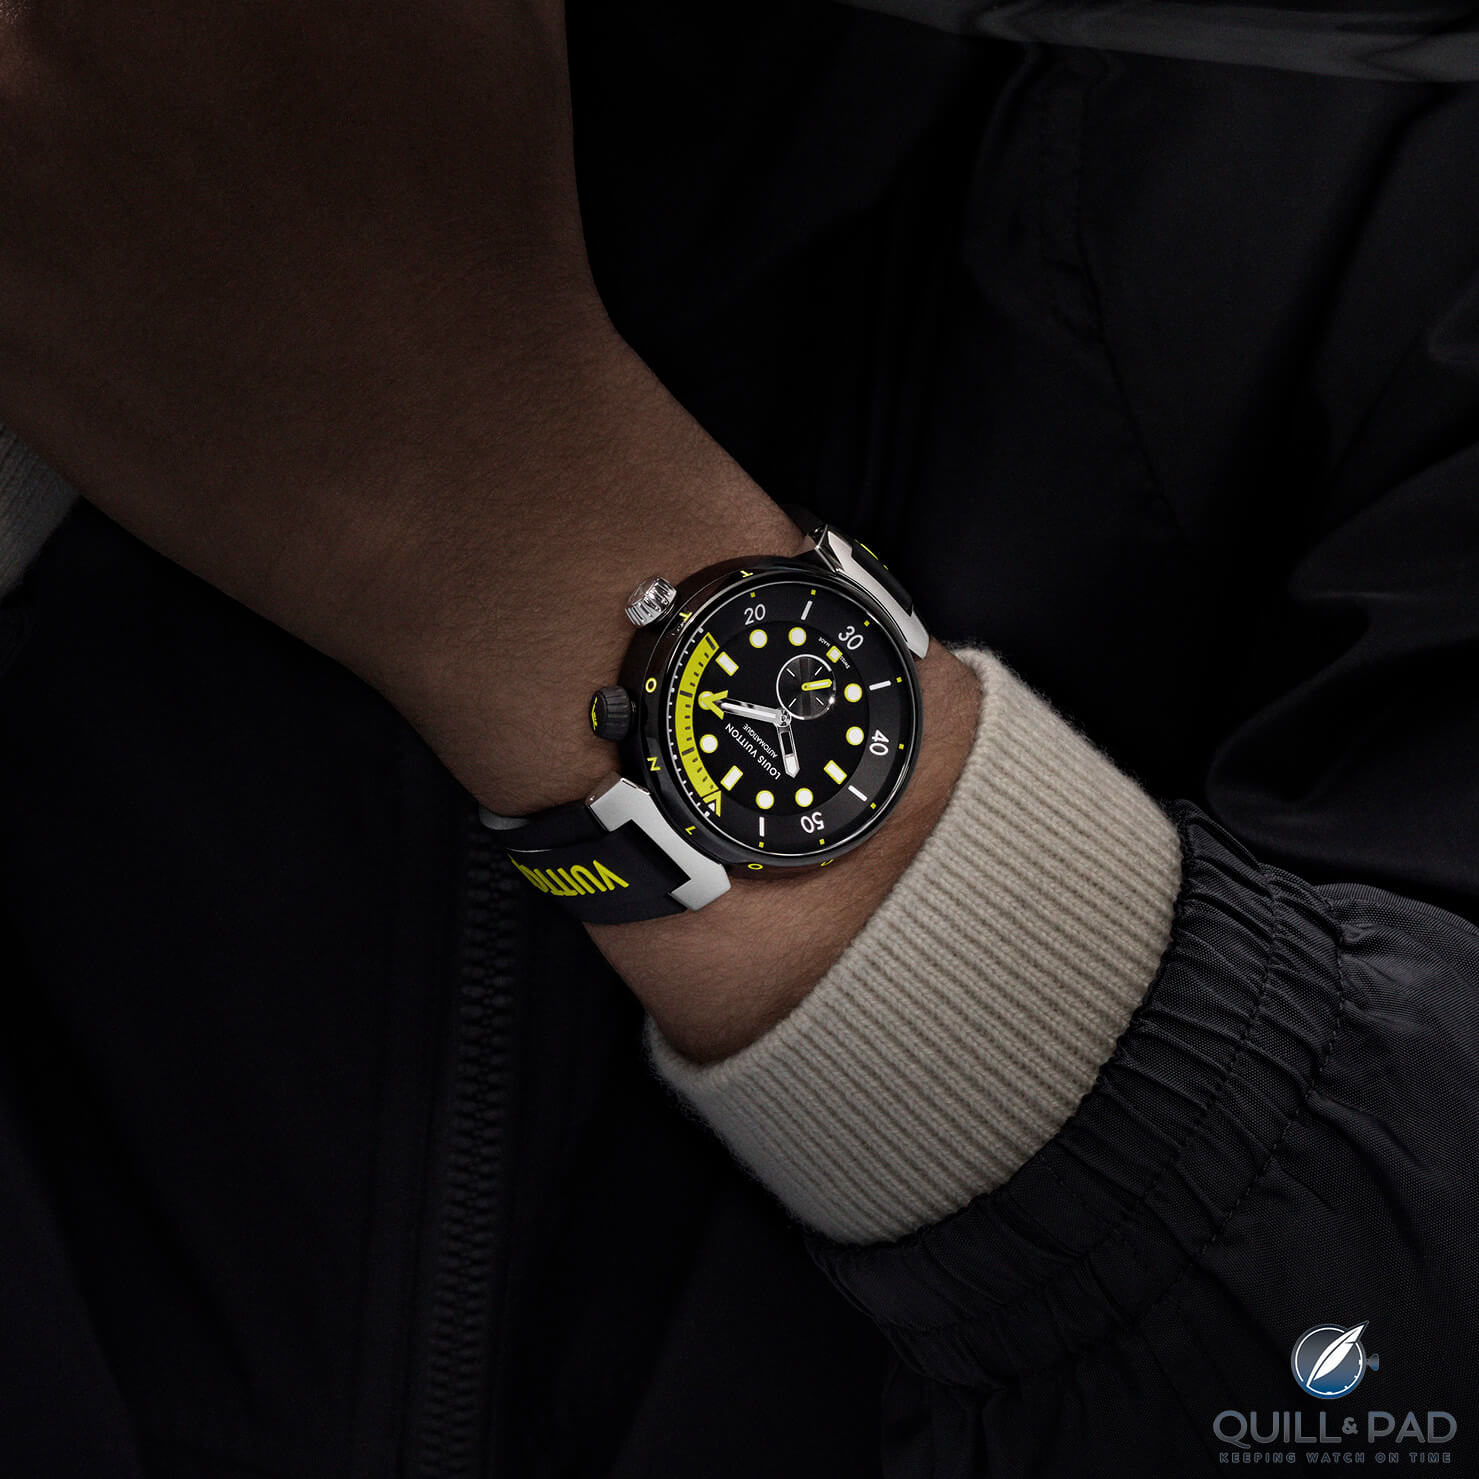 Louis Vuitton's Tambour Street Diver Watch Review, Price, and